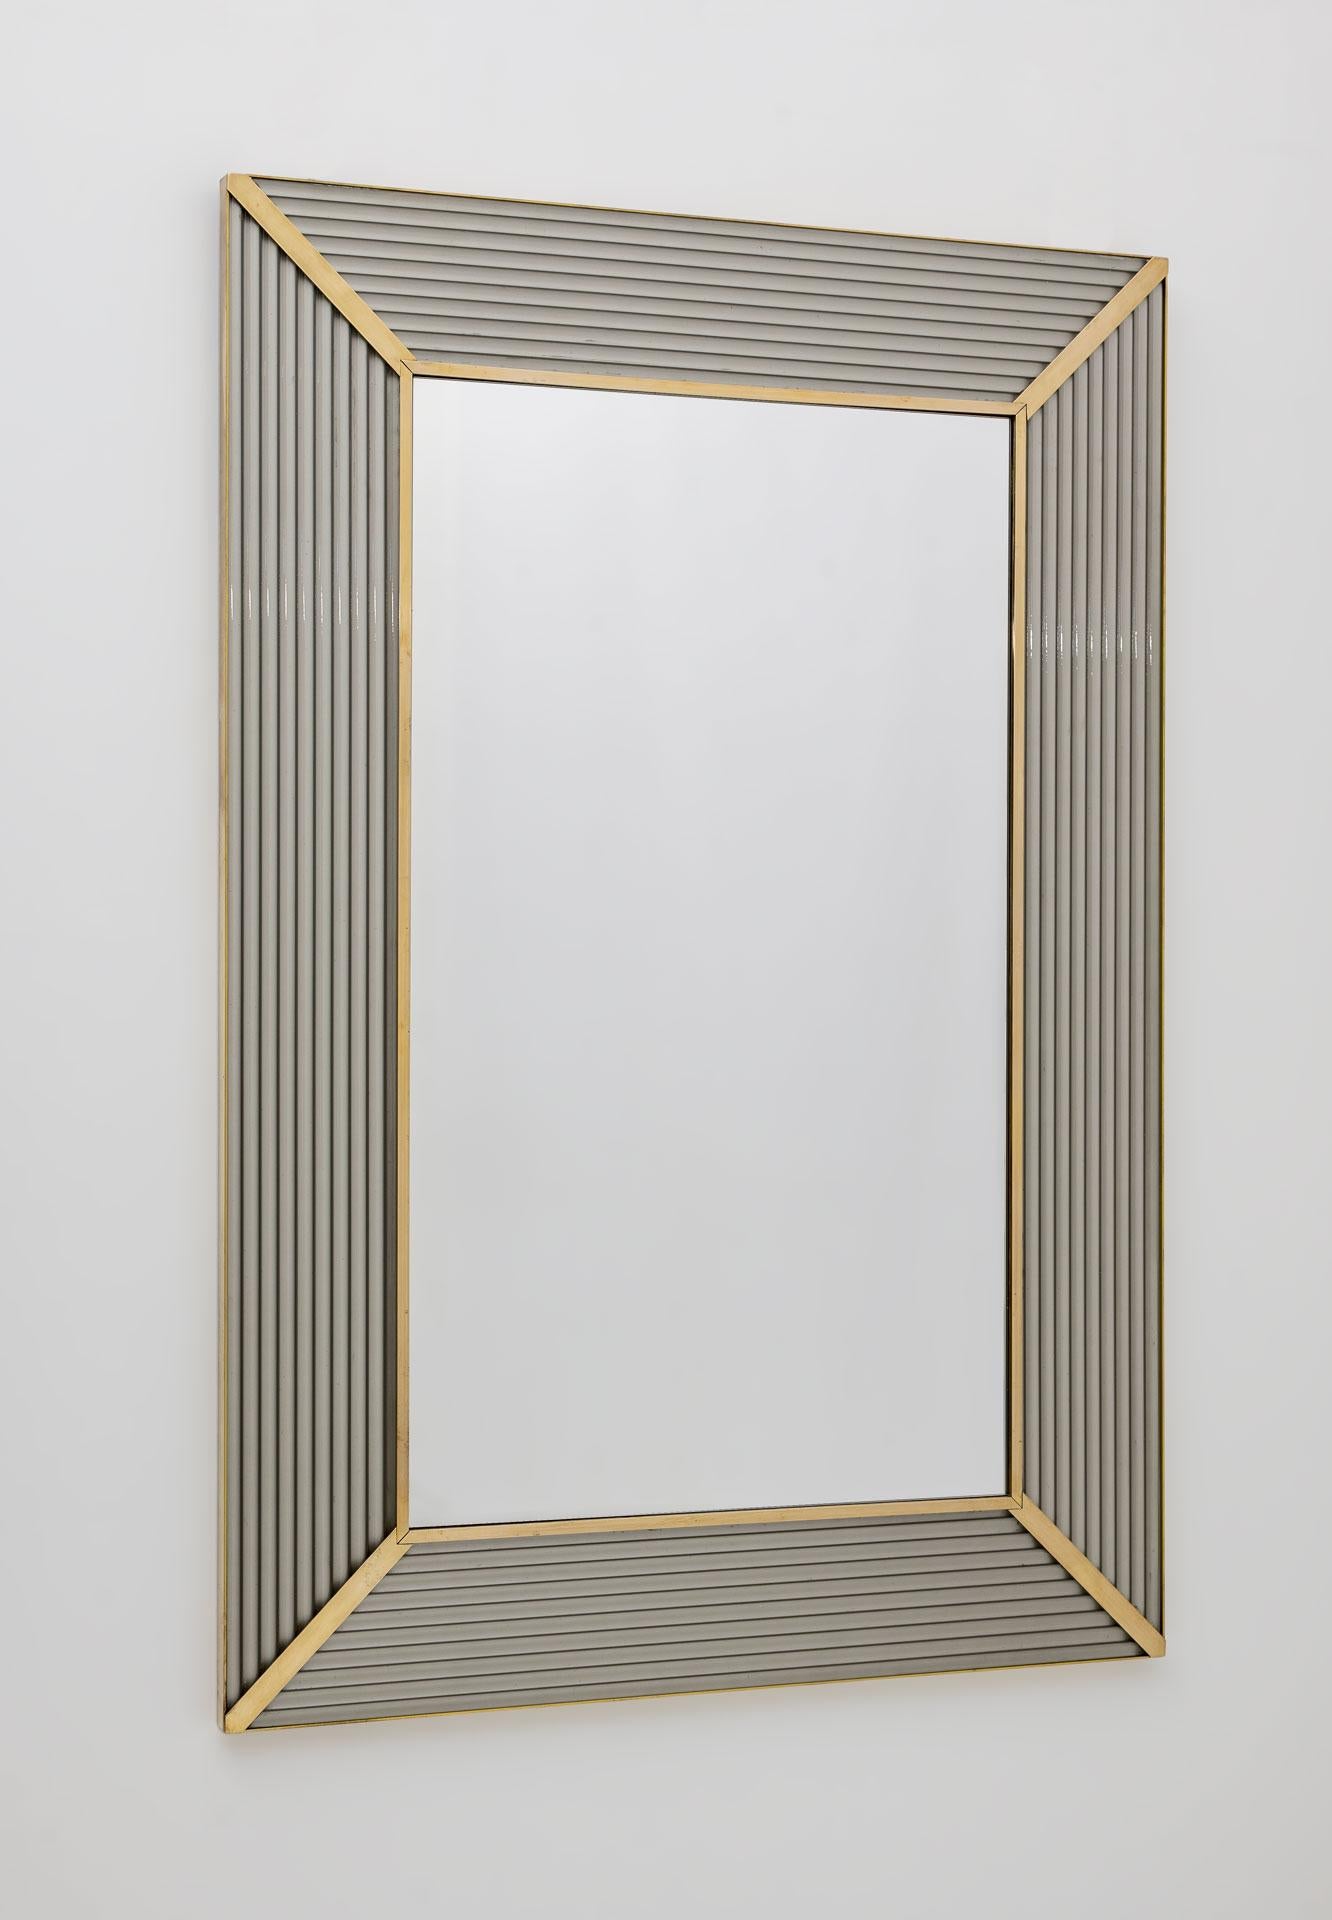 Mirror with gray Murano glass frame, with brass molding, the mirror structure is made of wood.
The mirror can be hung both vertically and horizontally